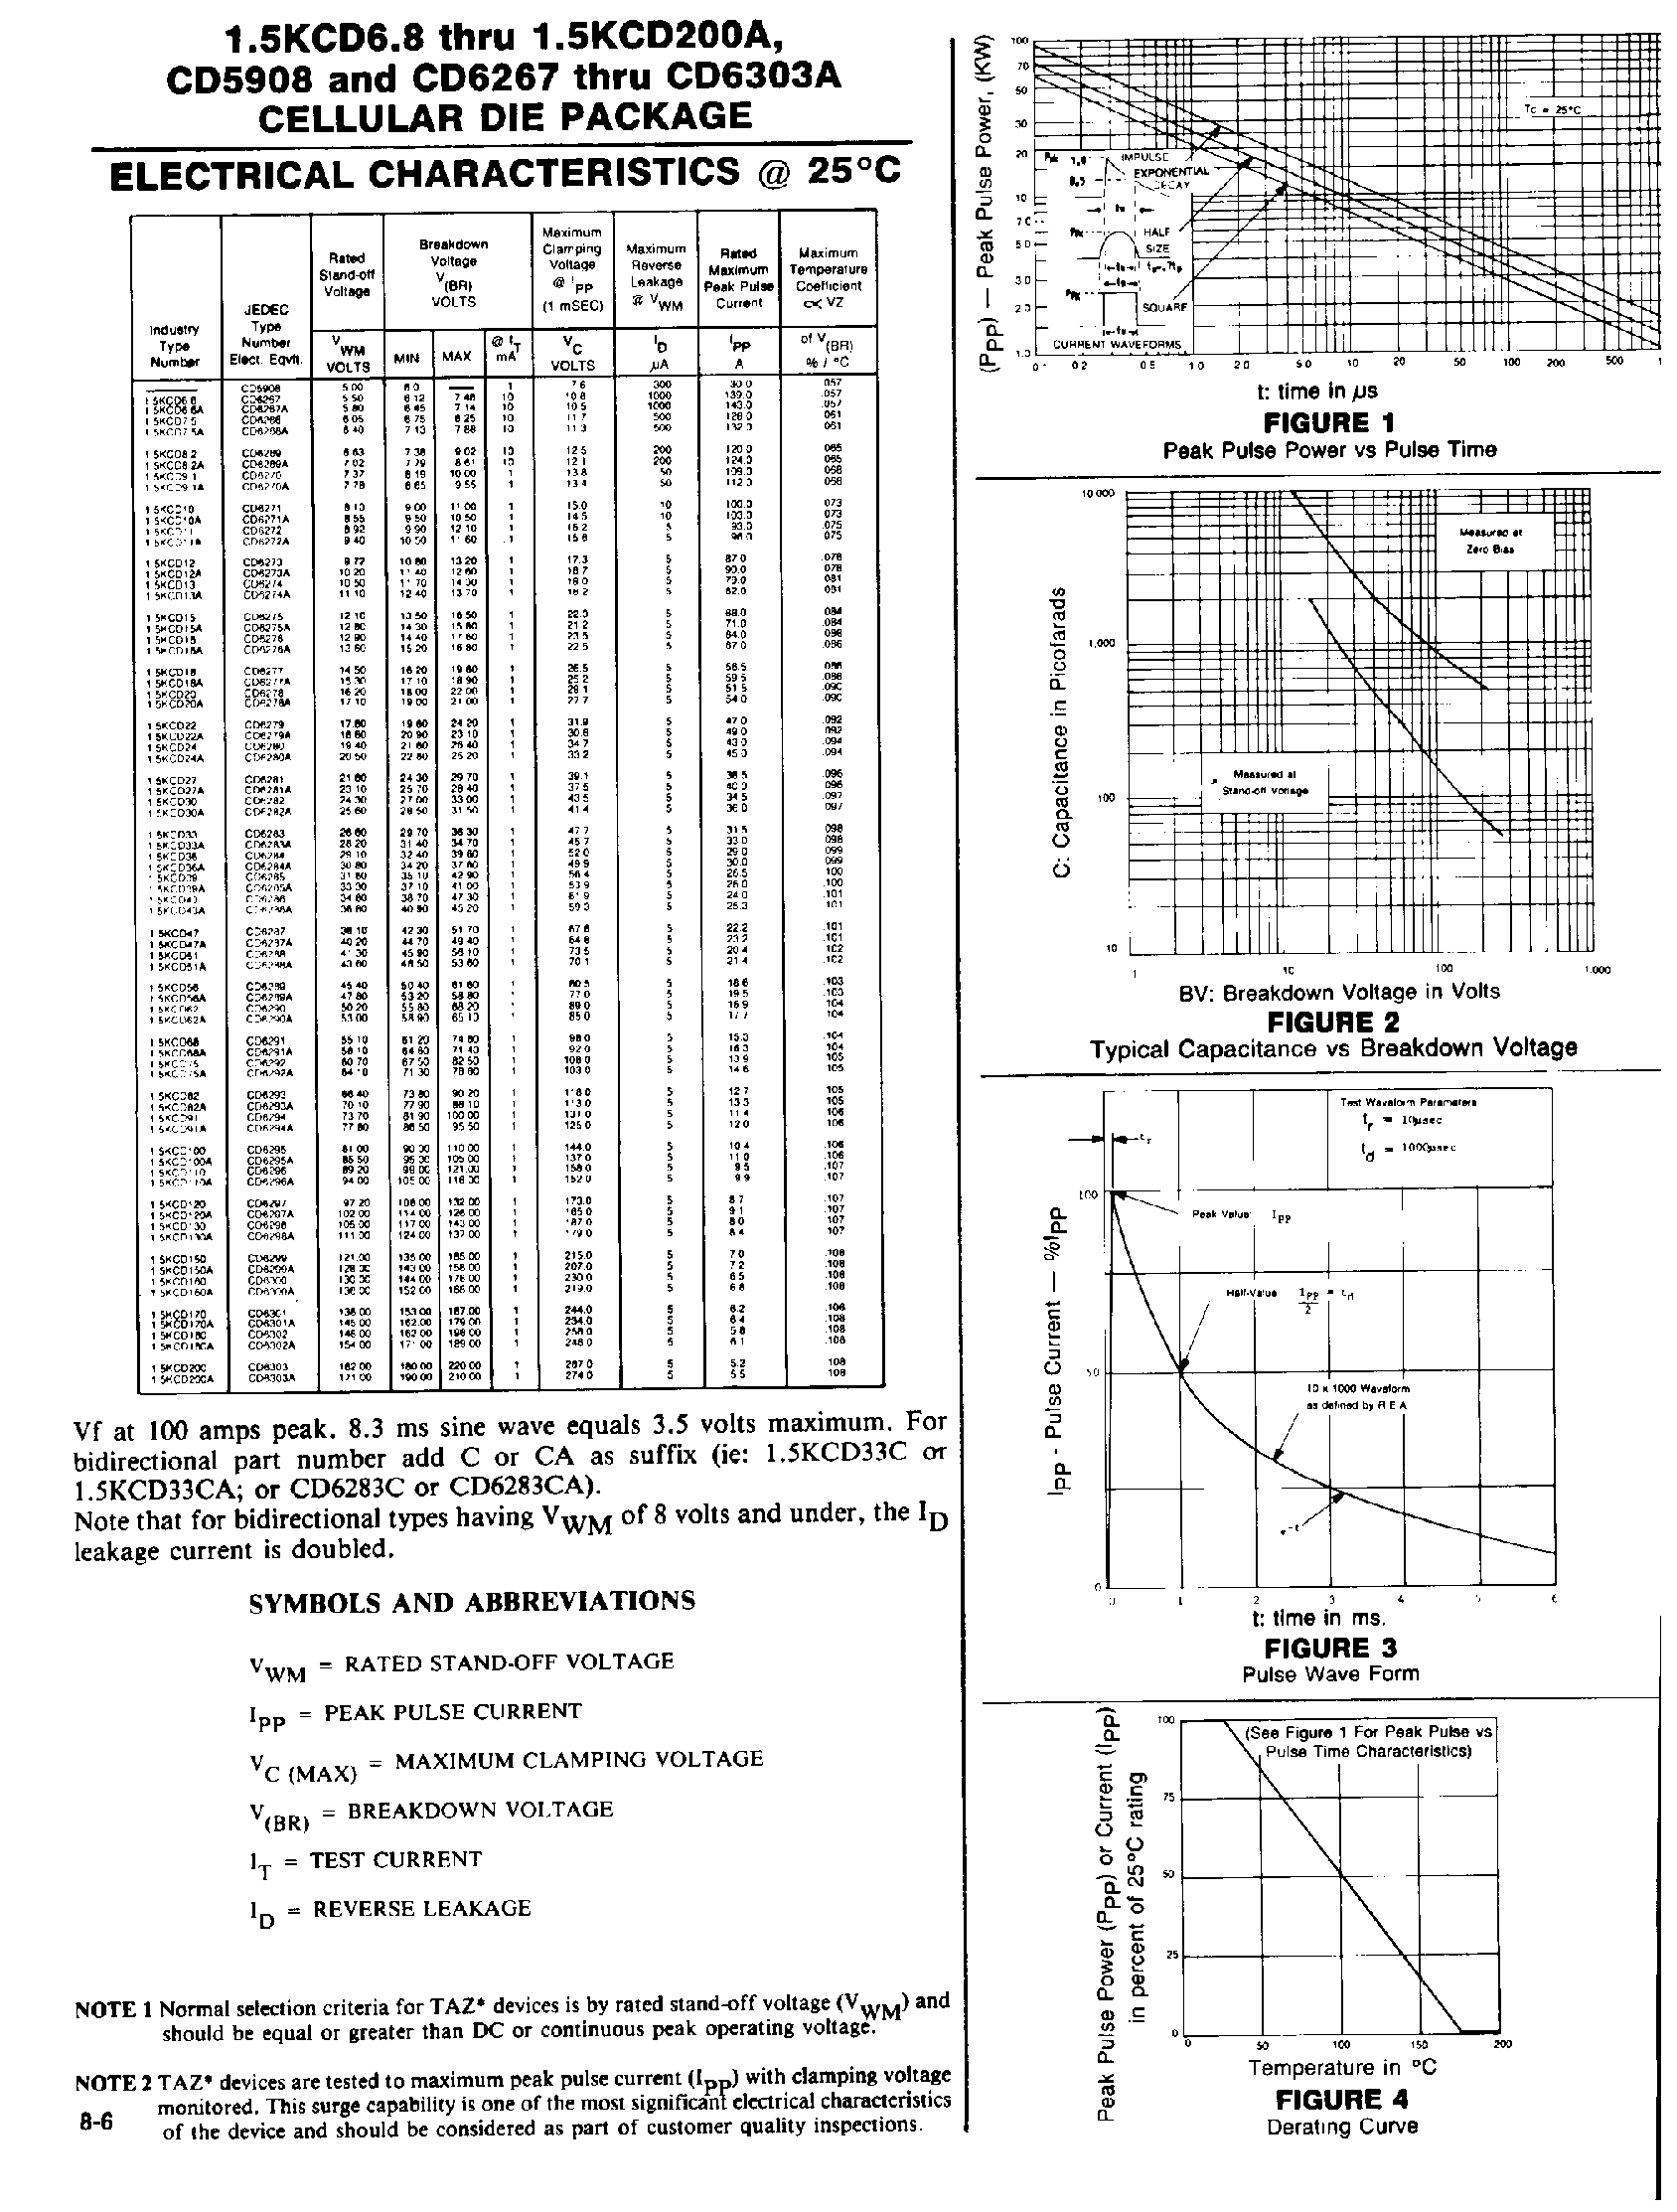 Datasheet CD6284A - Transient suppressor CELLULAR DIE PACKAGE page 2